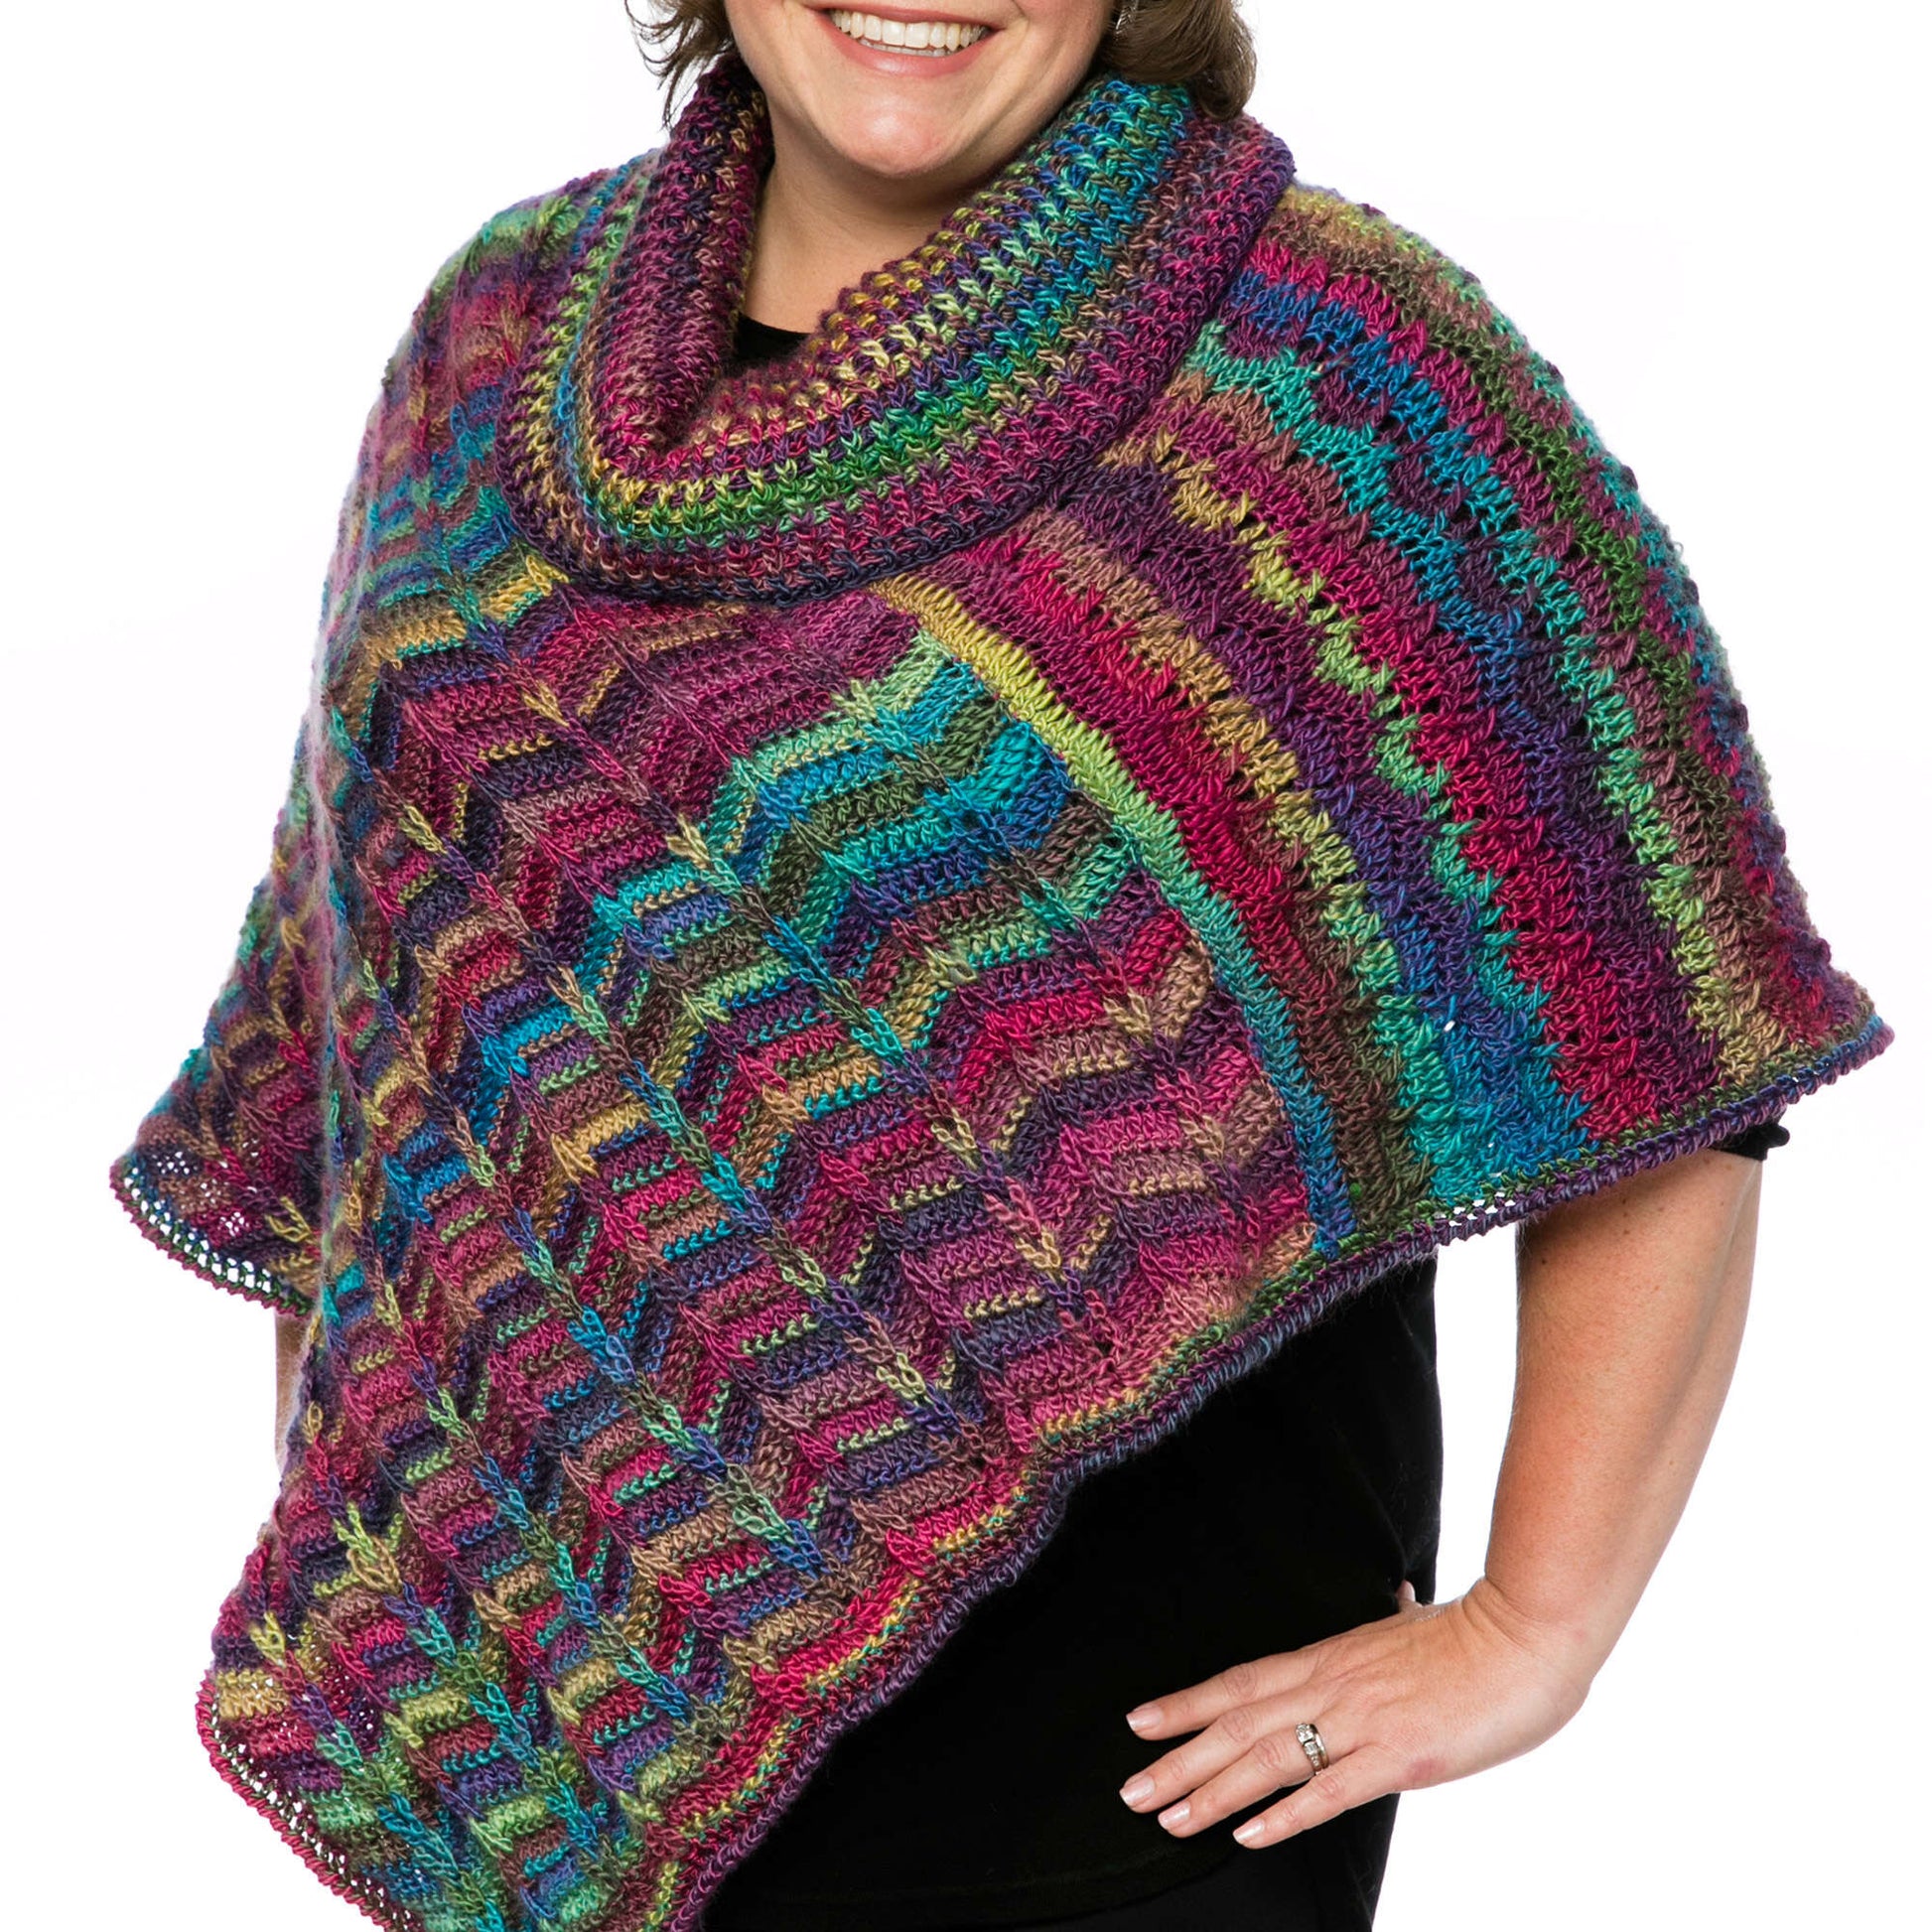 Free Red Heart Marly's Perfect Dramatic Cowl Poncho Crochet Pattern